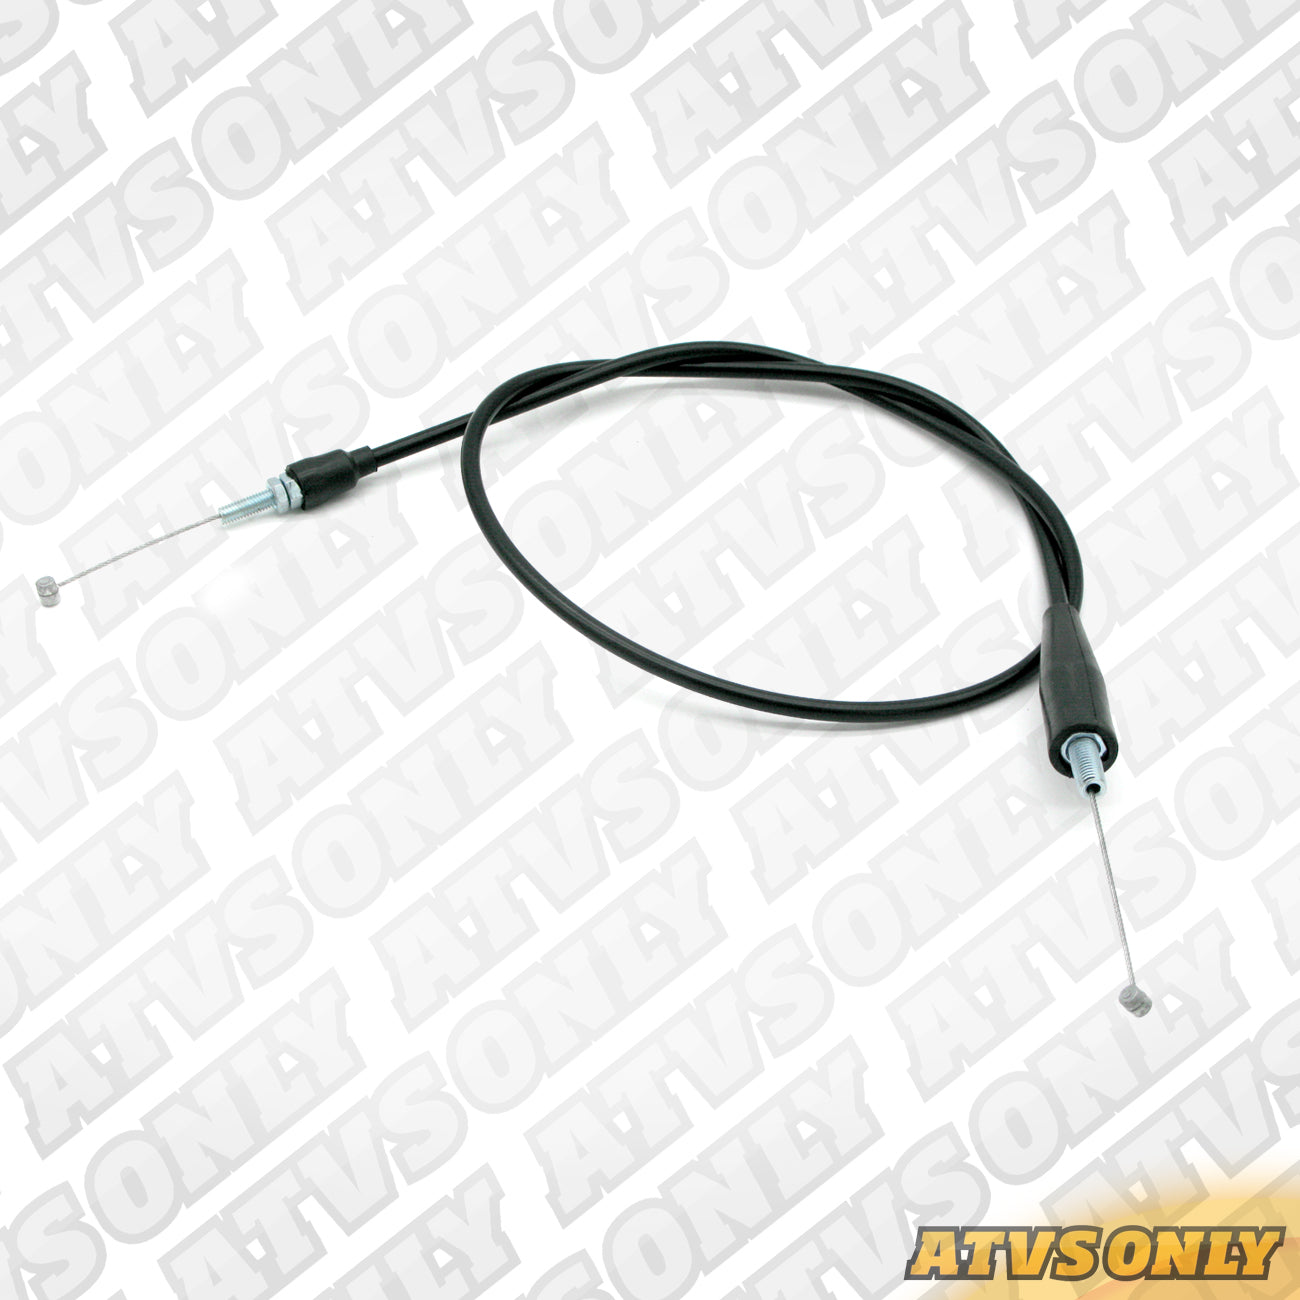 Cables - Replacement Vortex Throttle Cable for Honda TRX450R